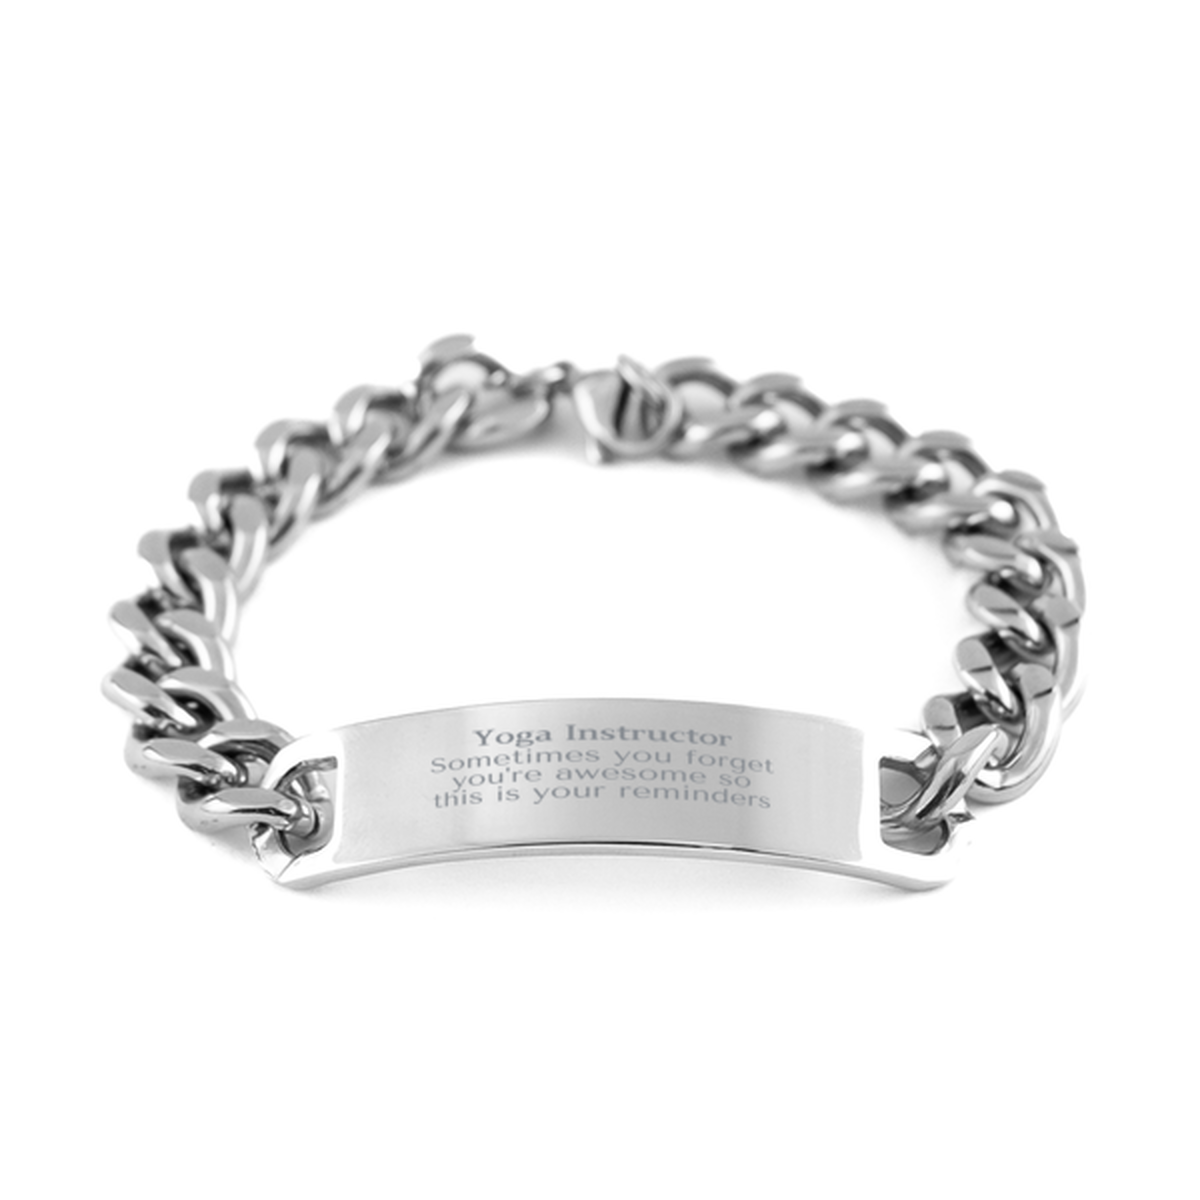 Sentimental Yoga Instructor Cuban Chain Stainless Steel Bracelet, Yoga Instructor Sometimes you forget you're awesome so this is your reminders, Graduation Christmas Birthday Gifts for Yoga Instructor, Men, Women, Coworkers